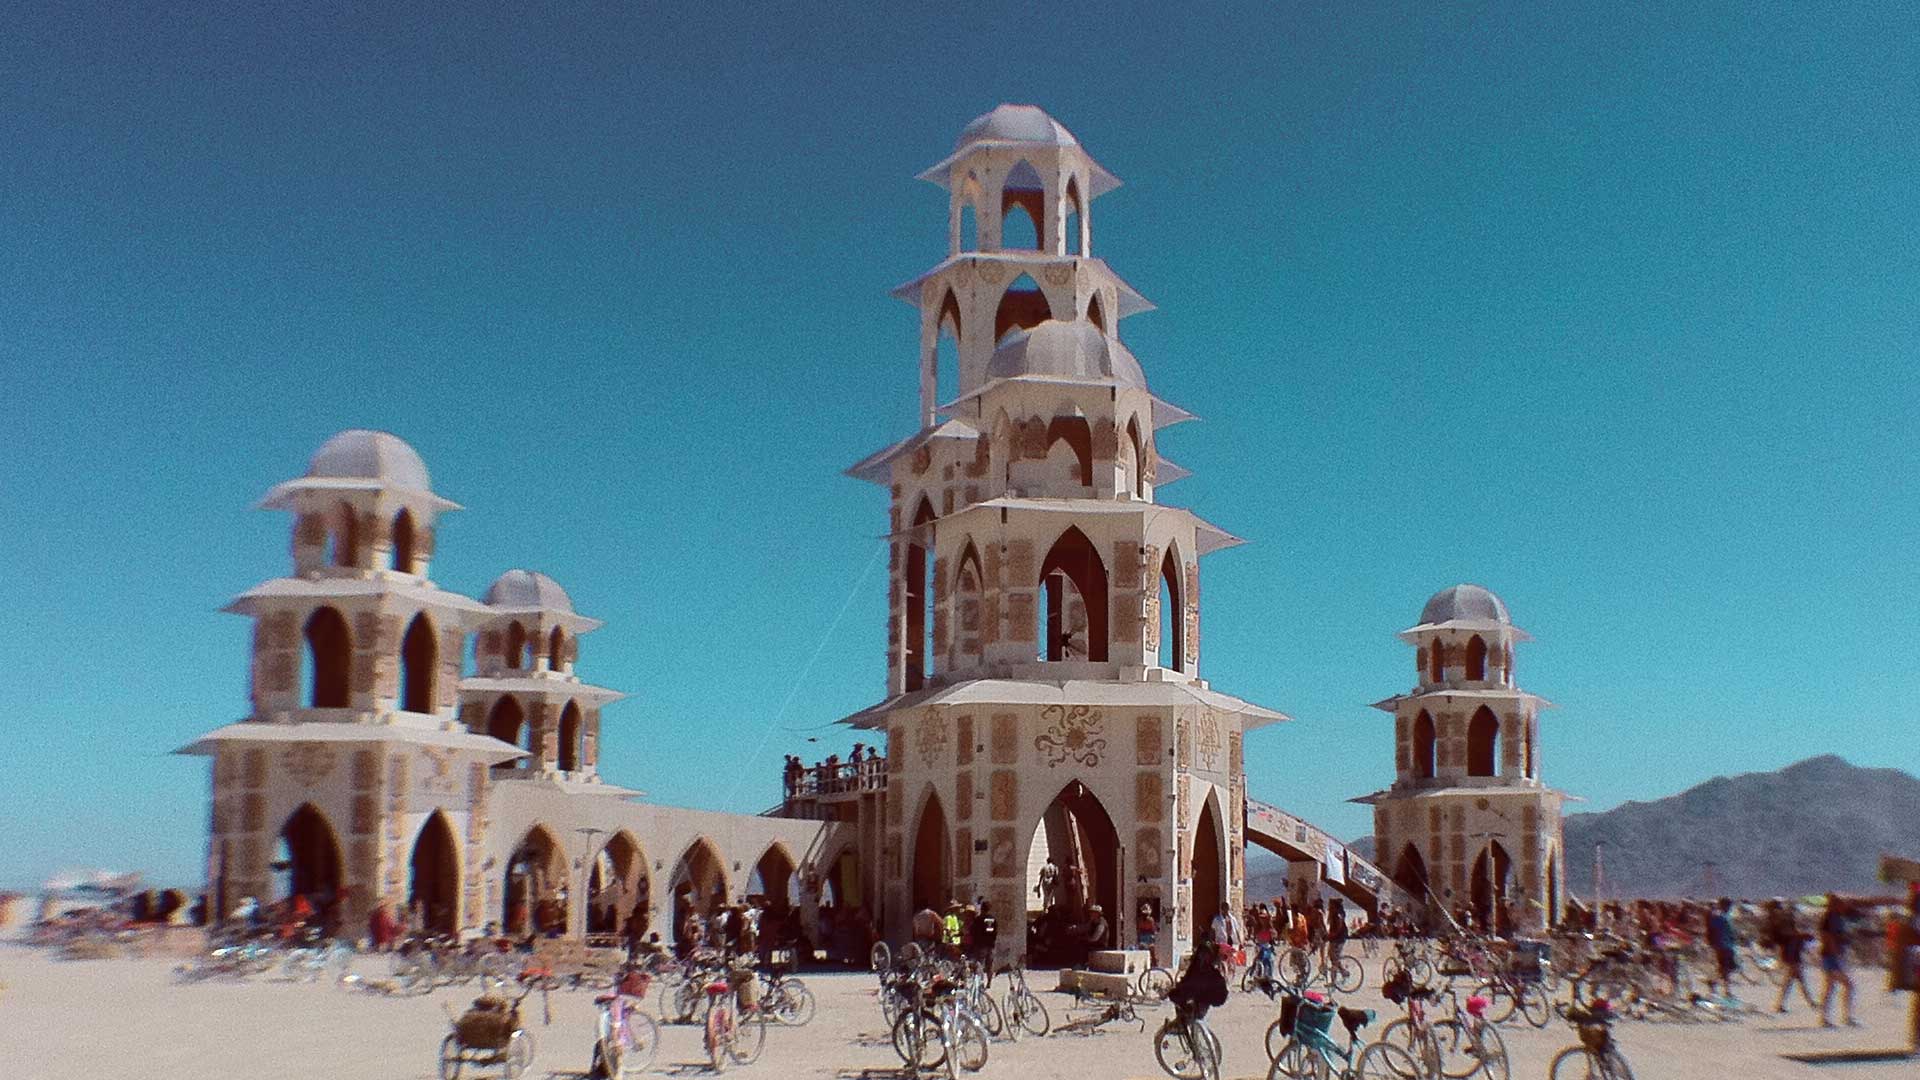 A Guide To Burning Man’s Temple